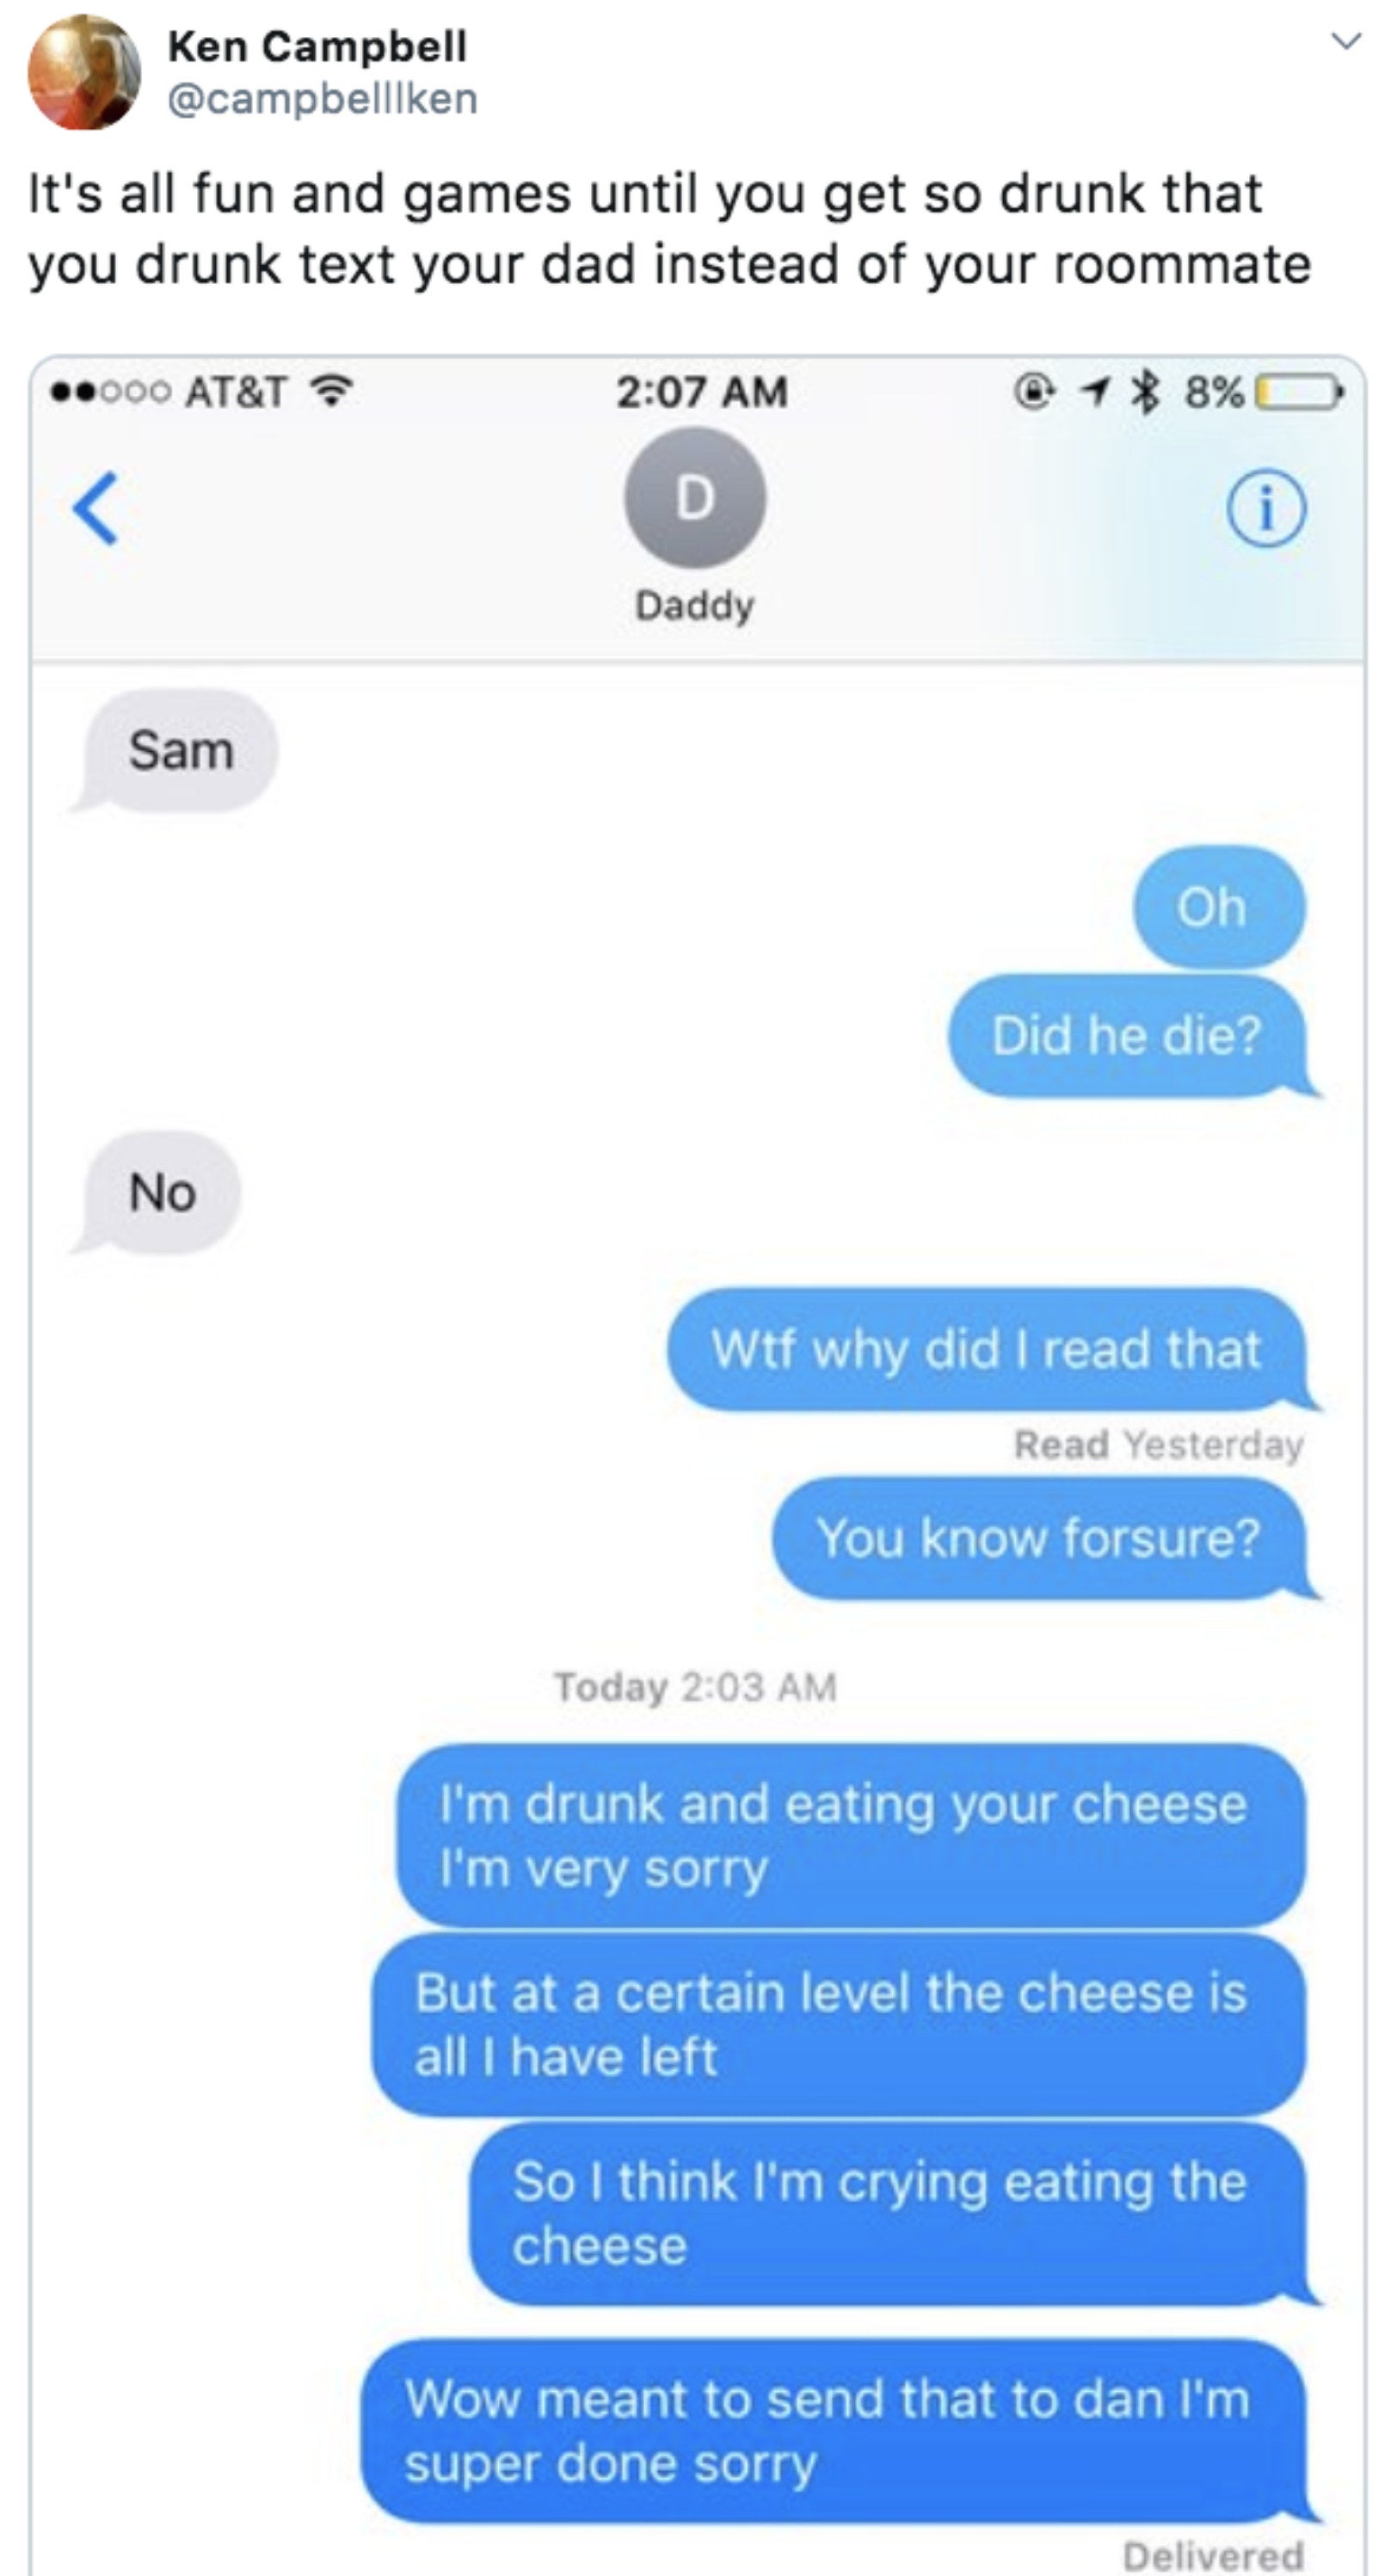 A text where someone says to their dad, &quot;I&#x27;m drunk and eating your cheese, but it&#x27;s all I have left, so I think I&#x27;m crying eating the cheese&quot; and then a text that saying &quot;Sorry, i meant to send that to dan&quot;